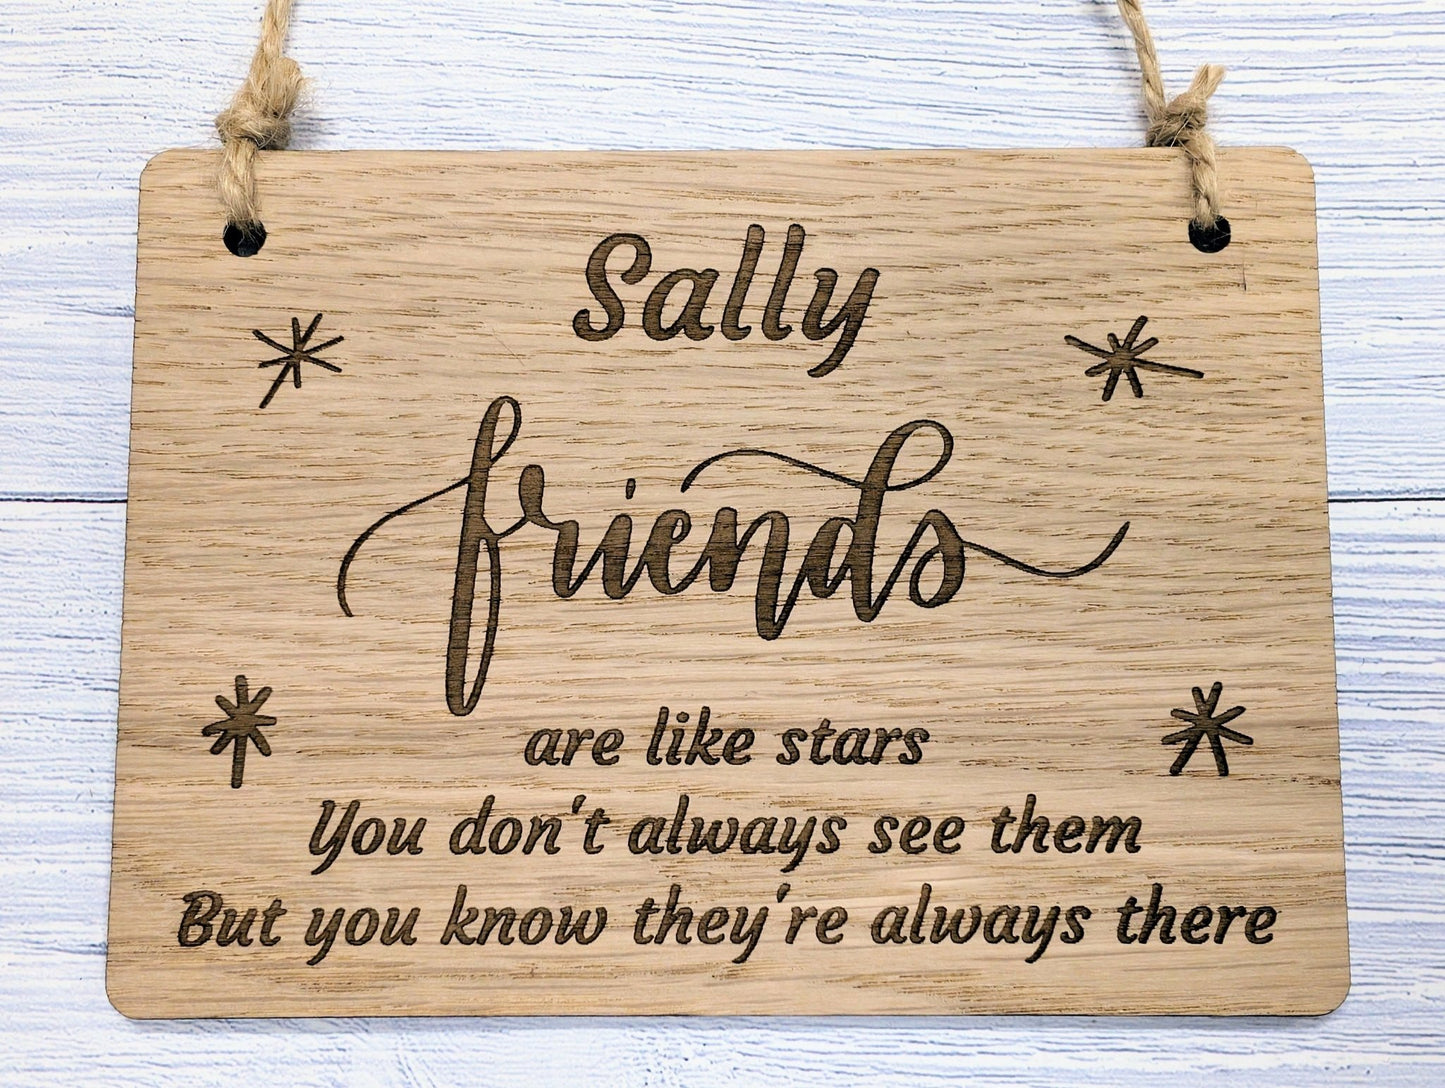 Personalised Friendship Wooden Sign - "Friends Are Like Stars" - Custom Name Option - Perfect Gift for Best Friends - CherryGroveCraft